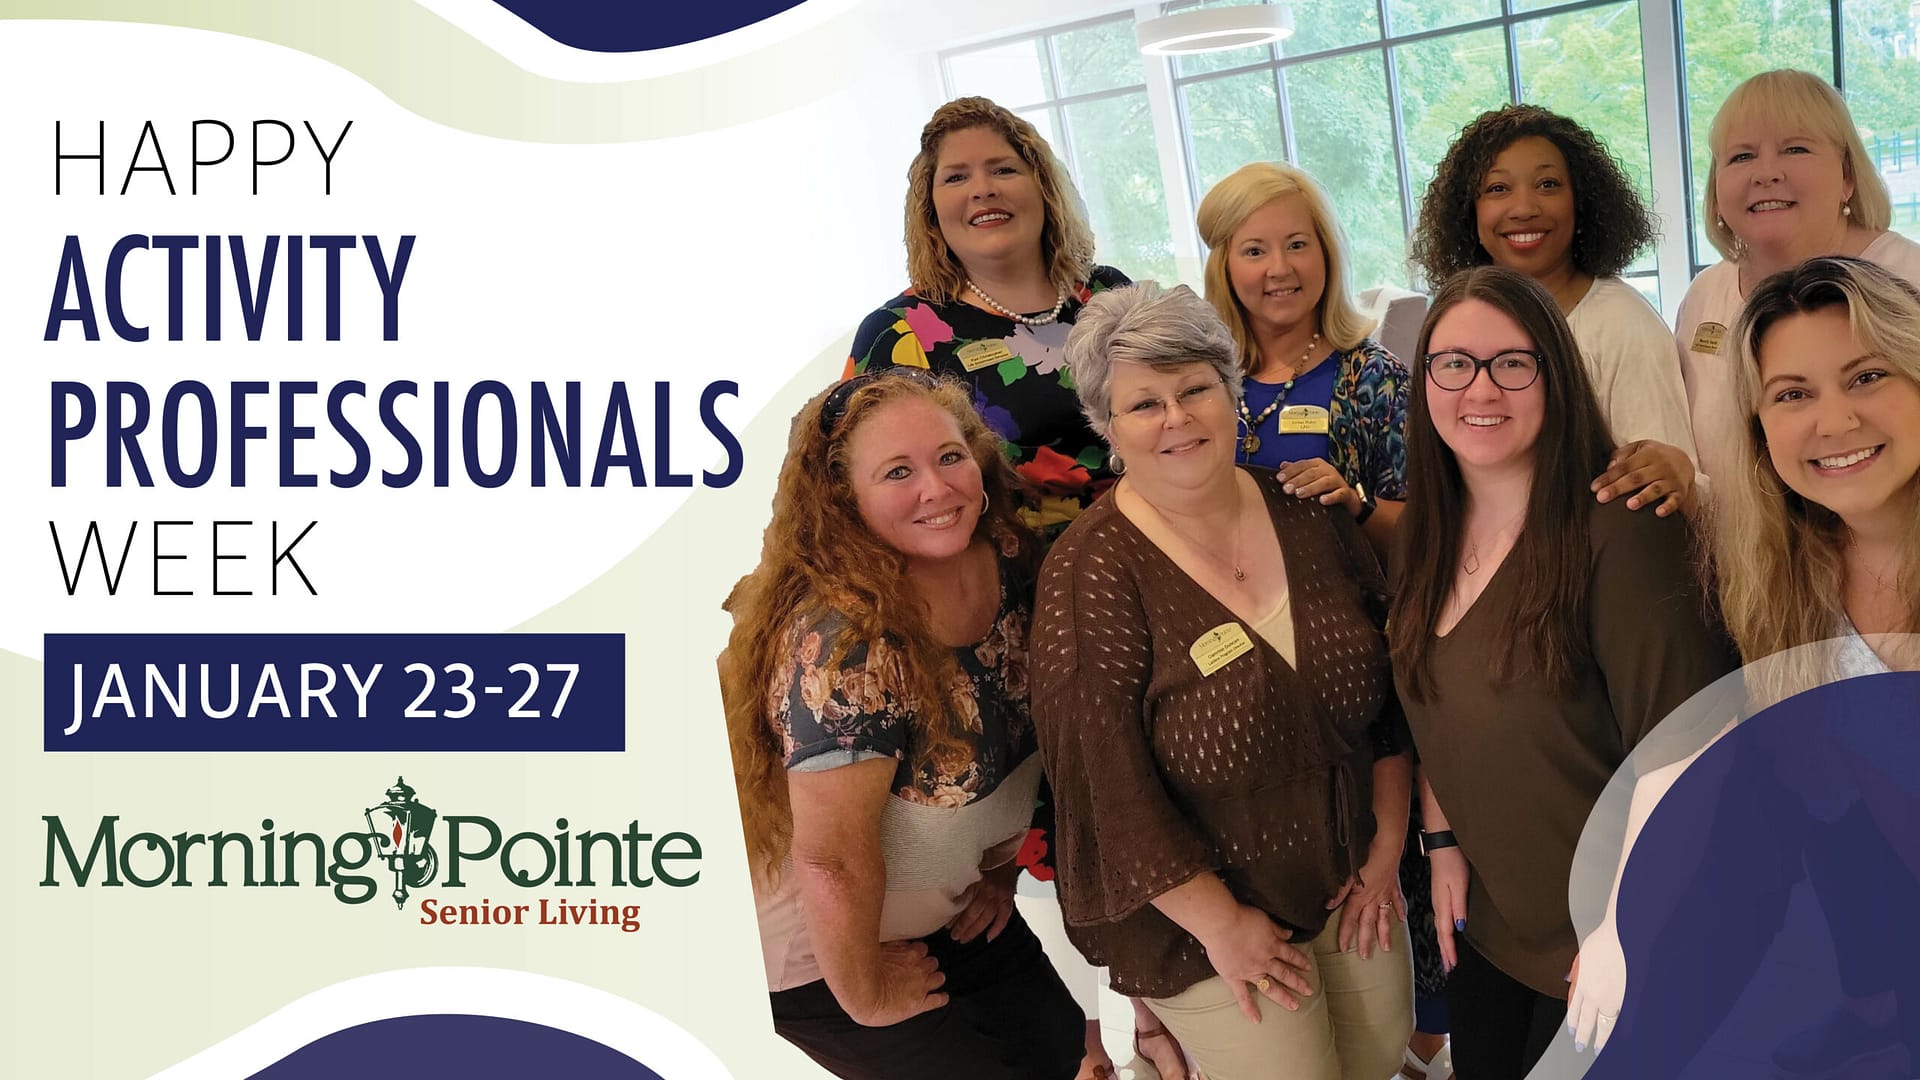 Morning Pointe Senior Living honors National Activity Professionals